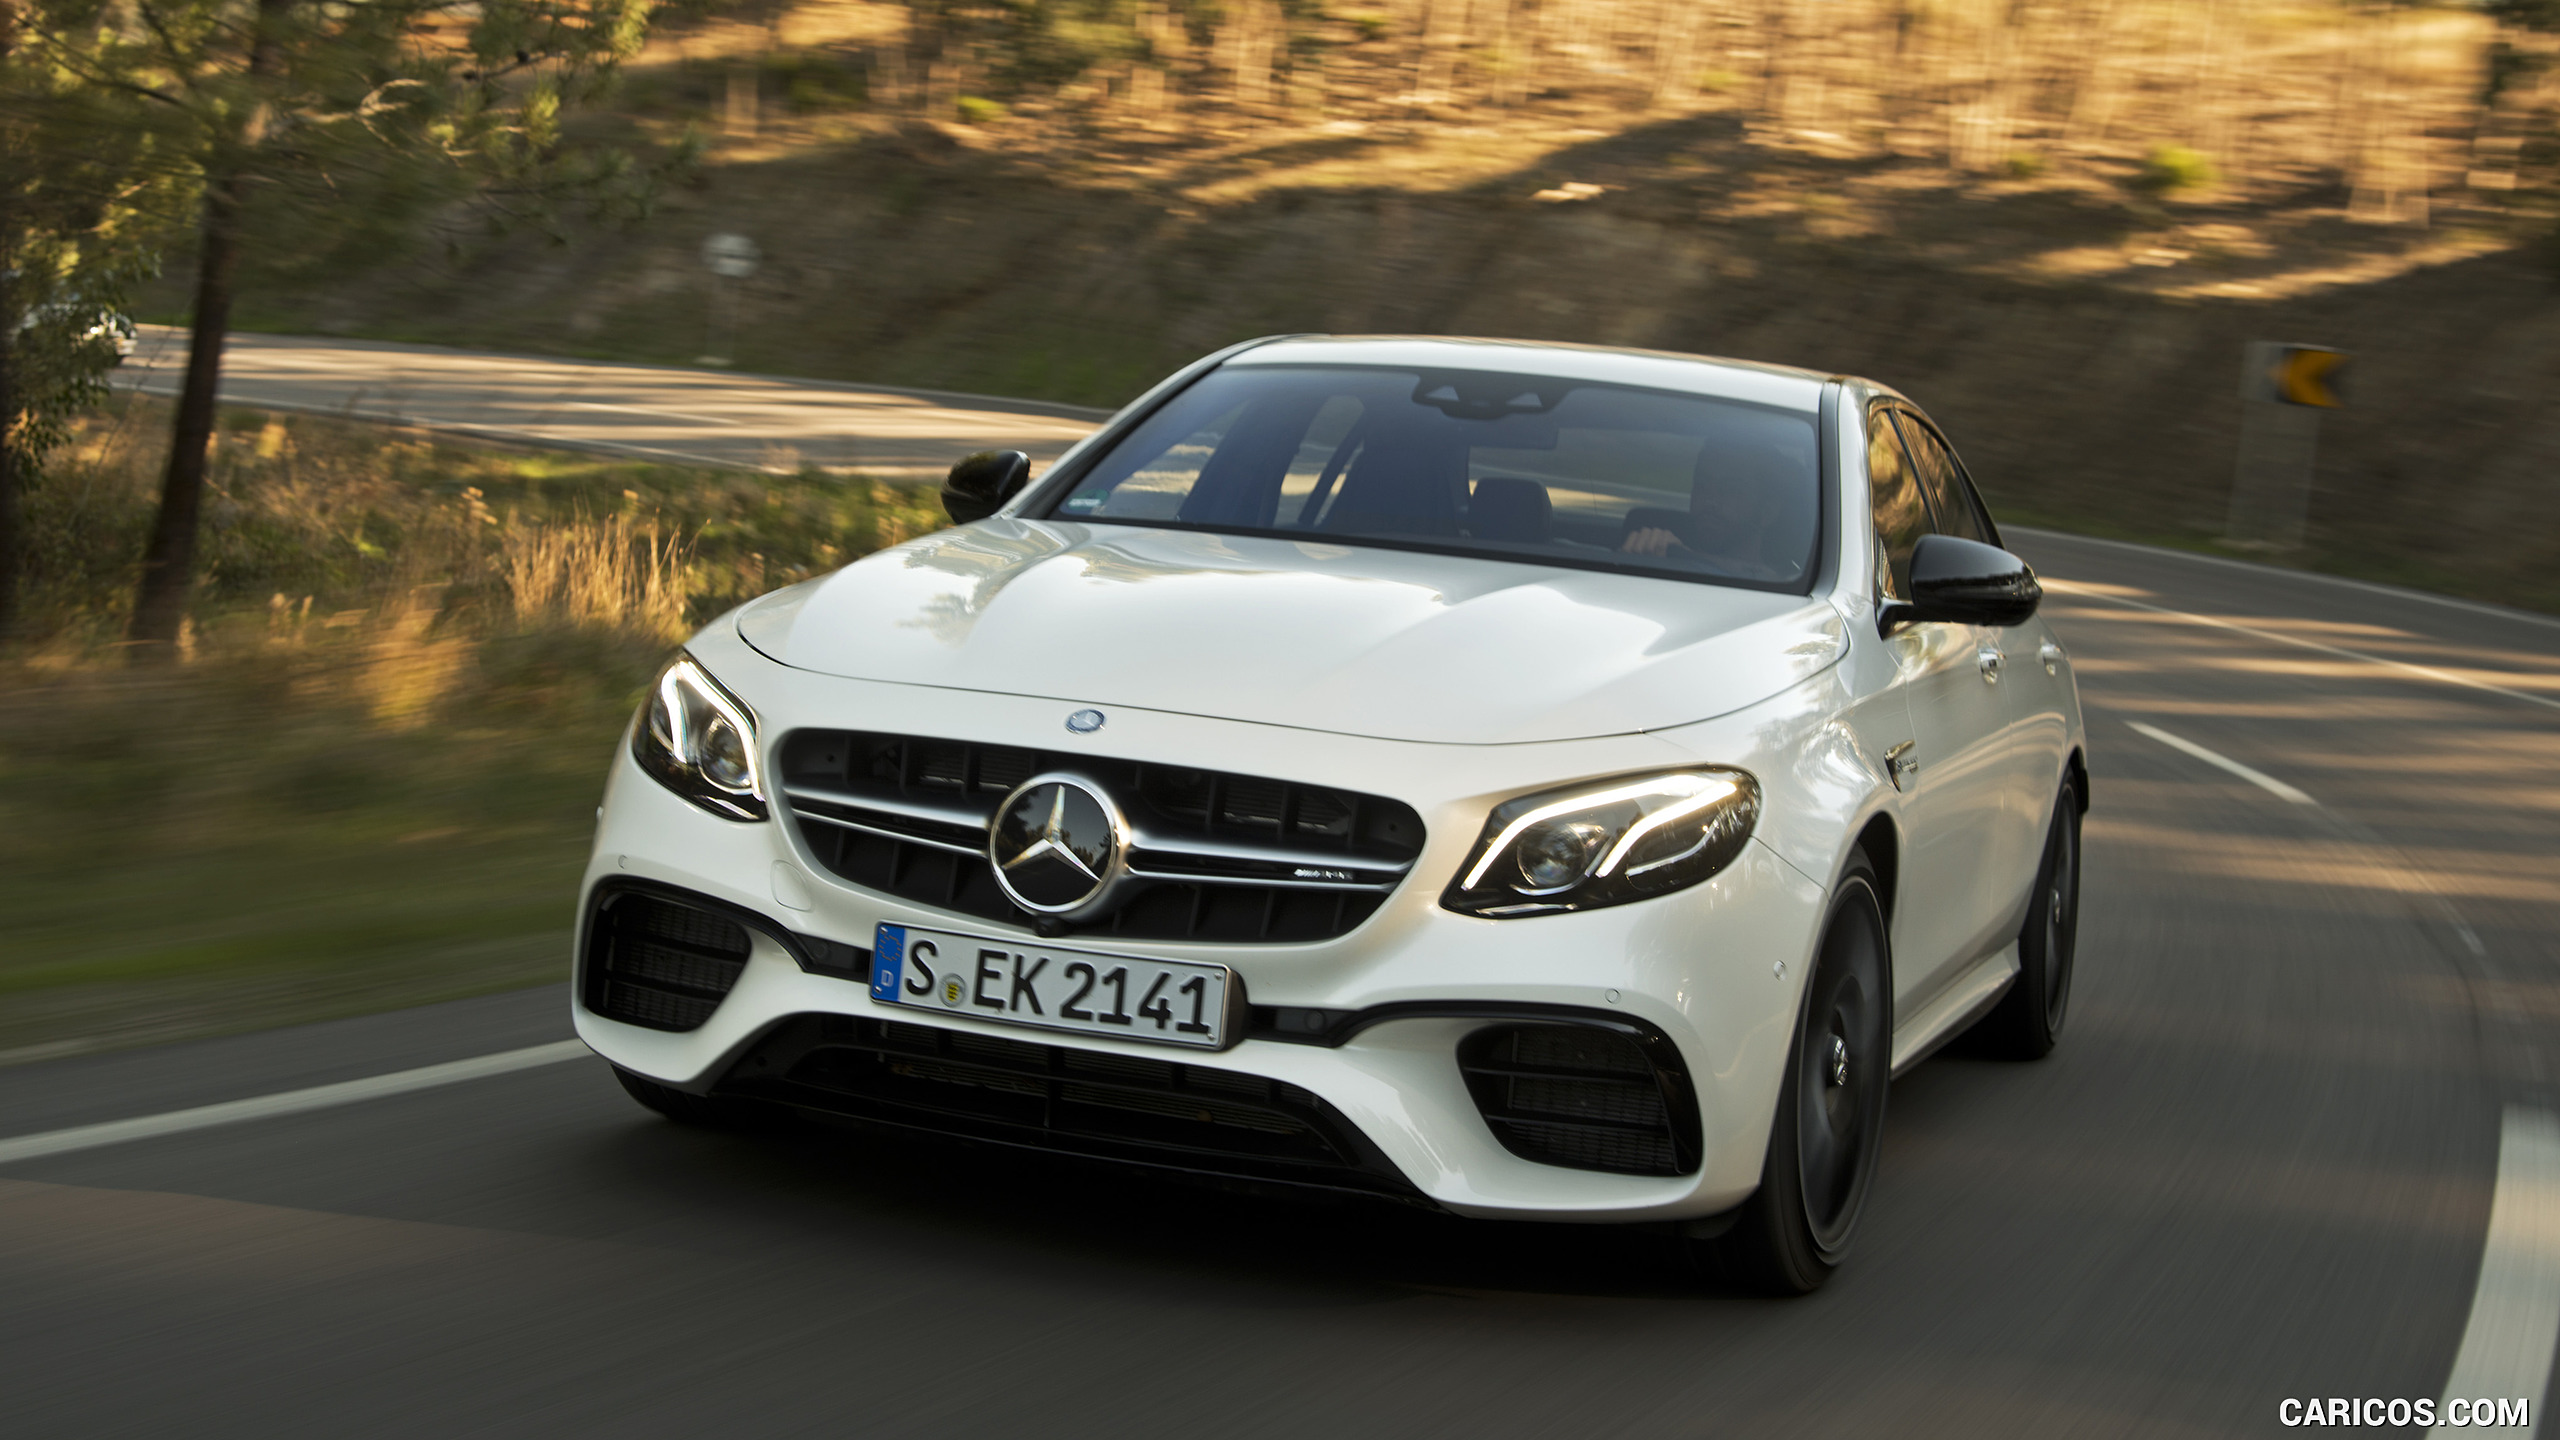 2018 Mercedes-AMG E63 S 4MATIC+ - Front, #60 of 323